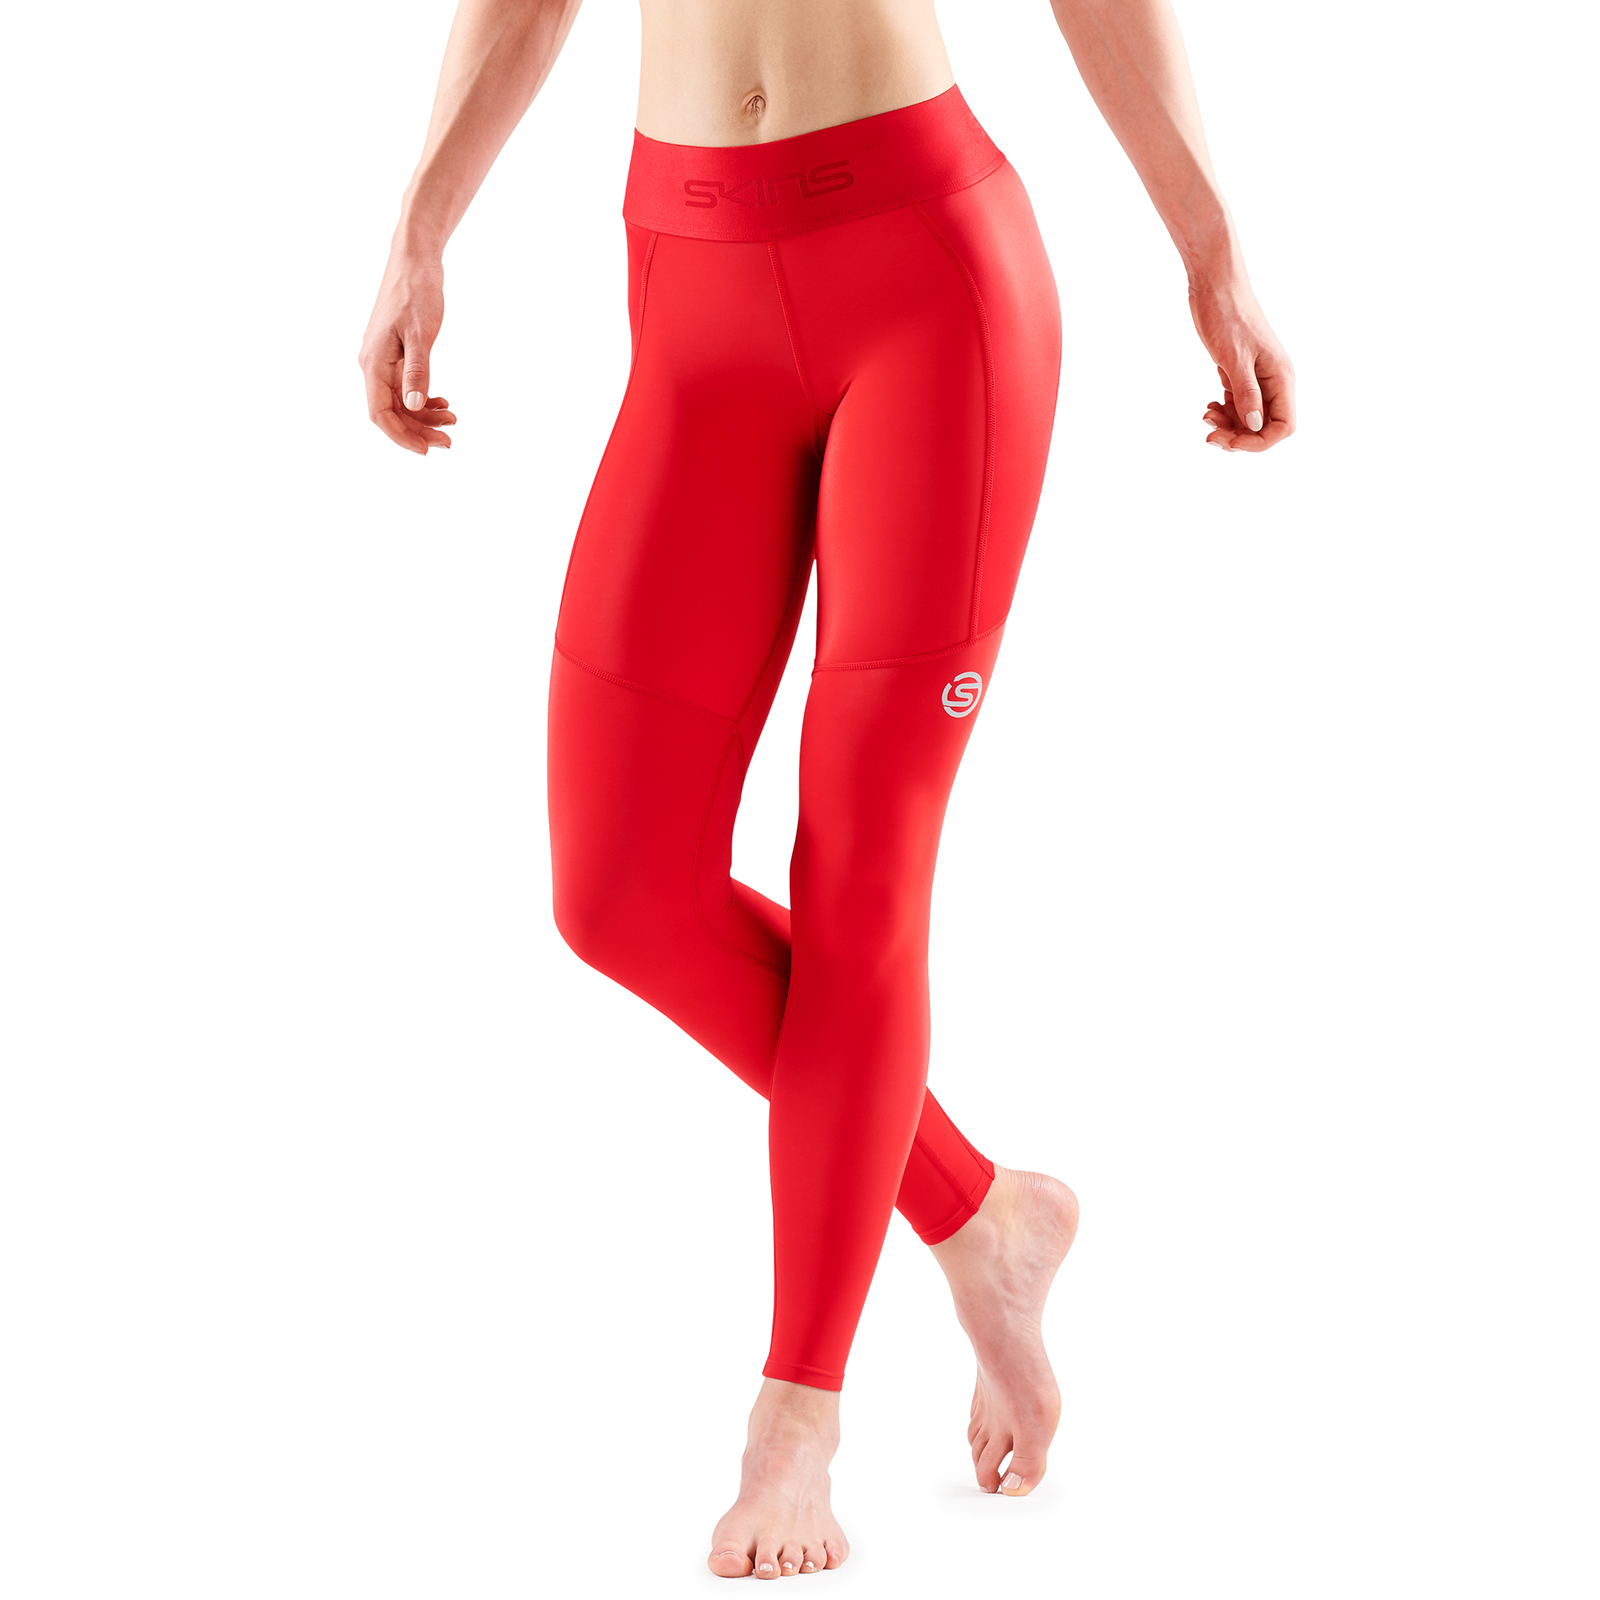 SKINS SERIES-3 WOMEN'S THERMAL LONG TIGHTS RED - SKINS Compression UK